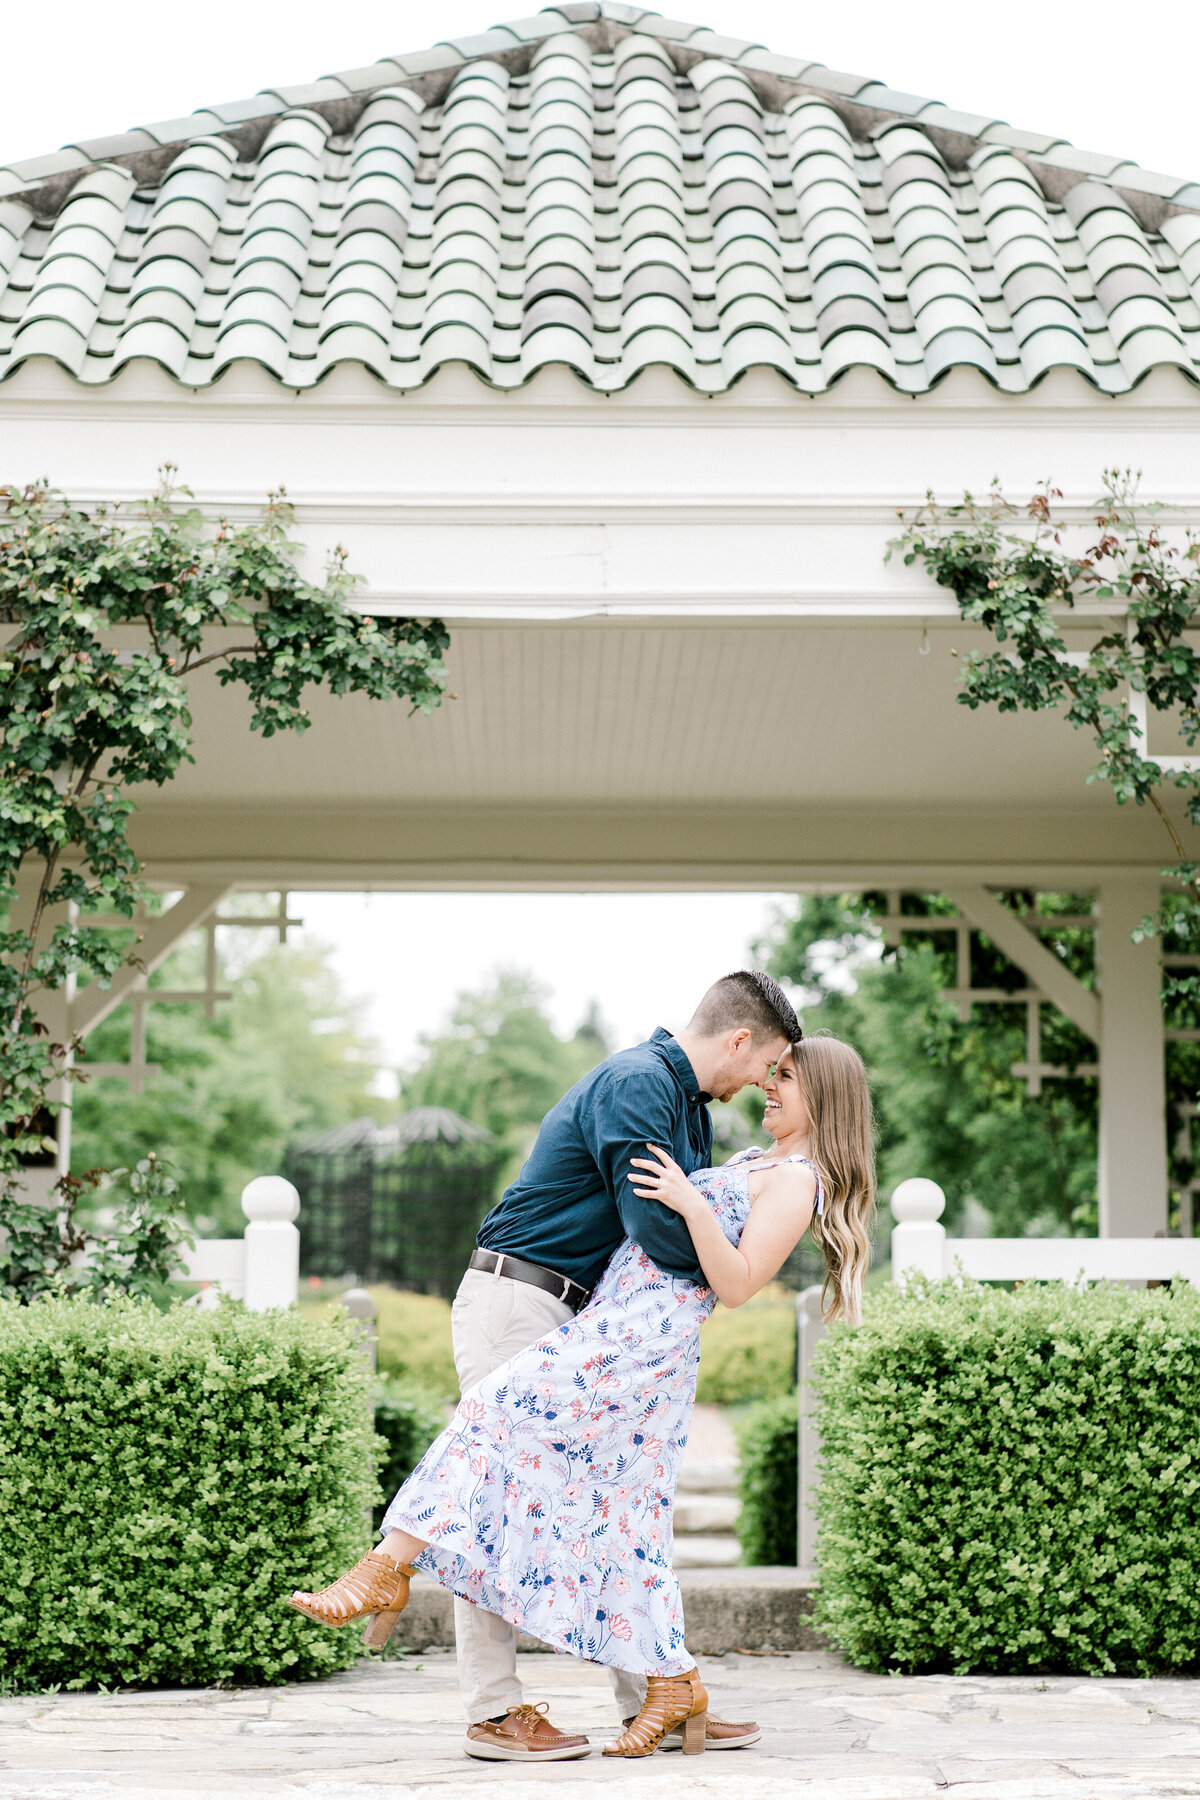 Hershey Garden Engagement Session Photography Photo-44